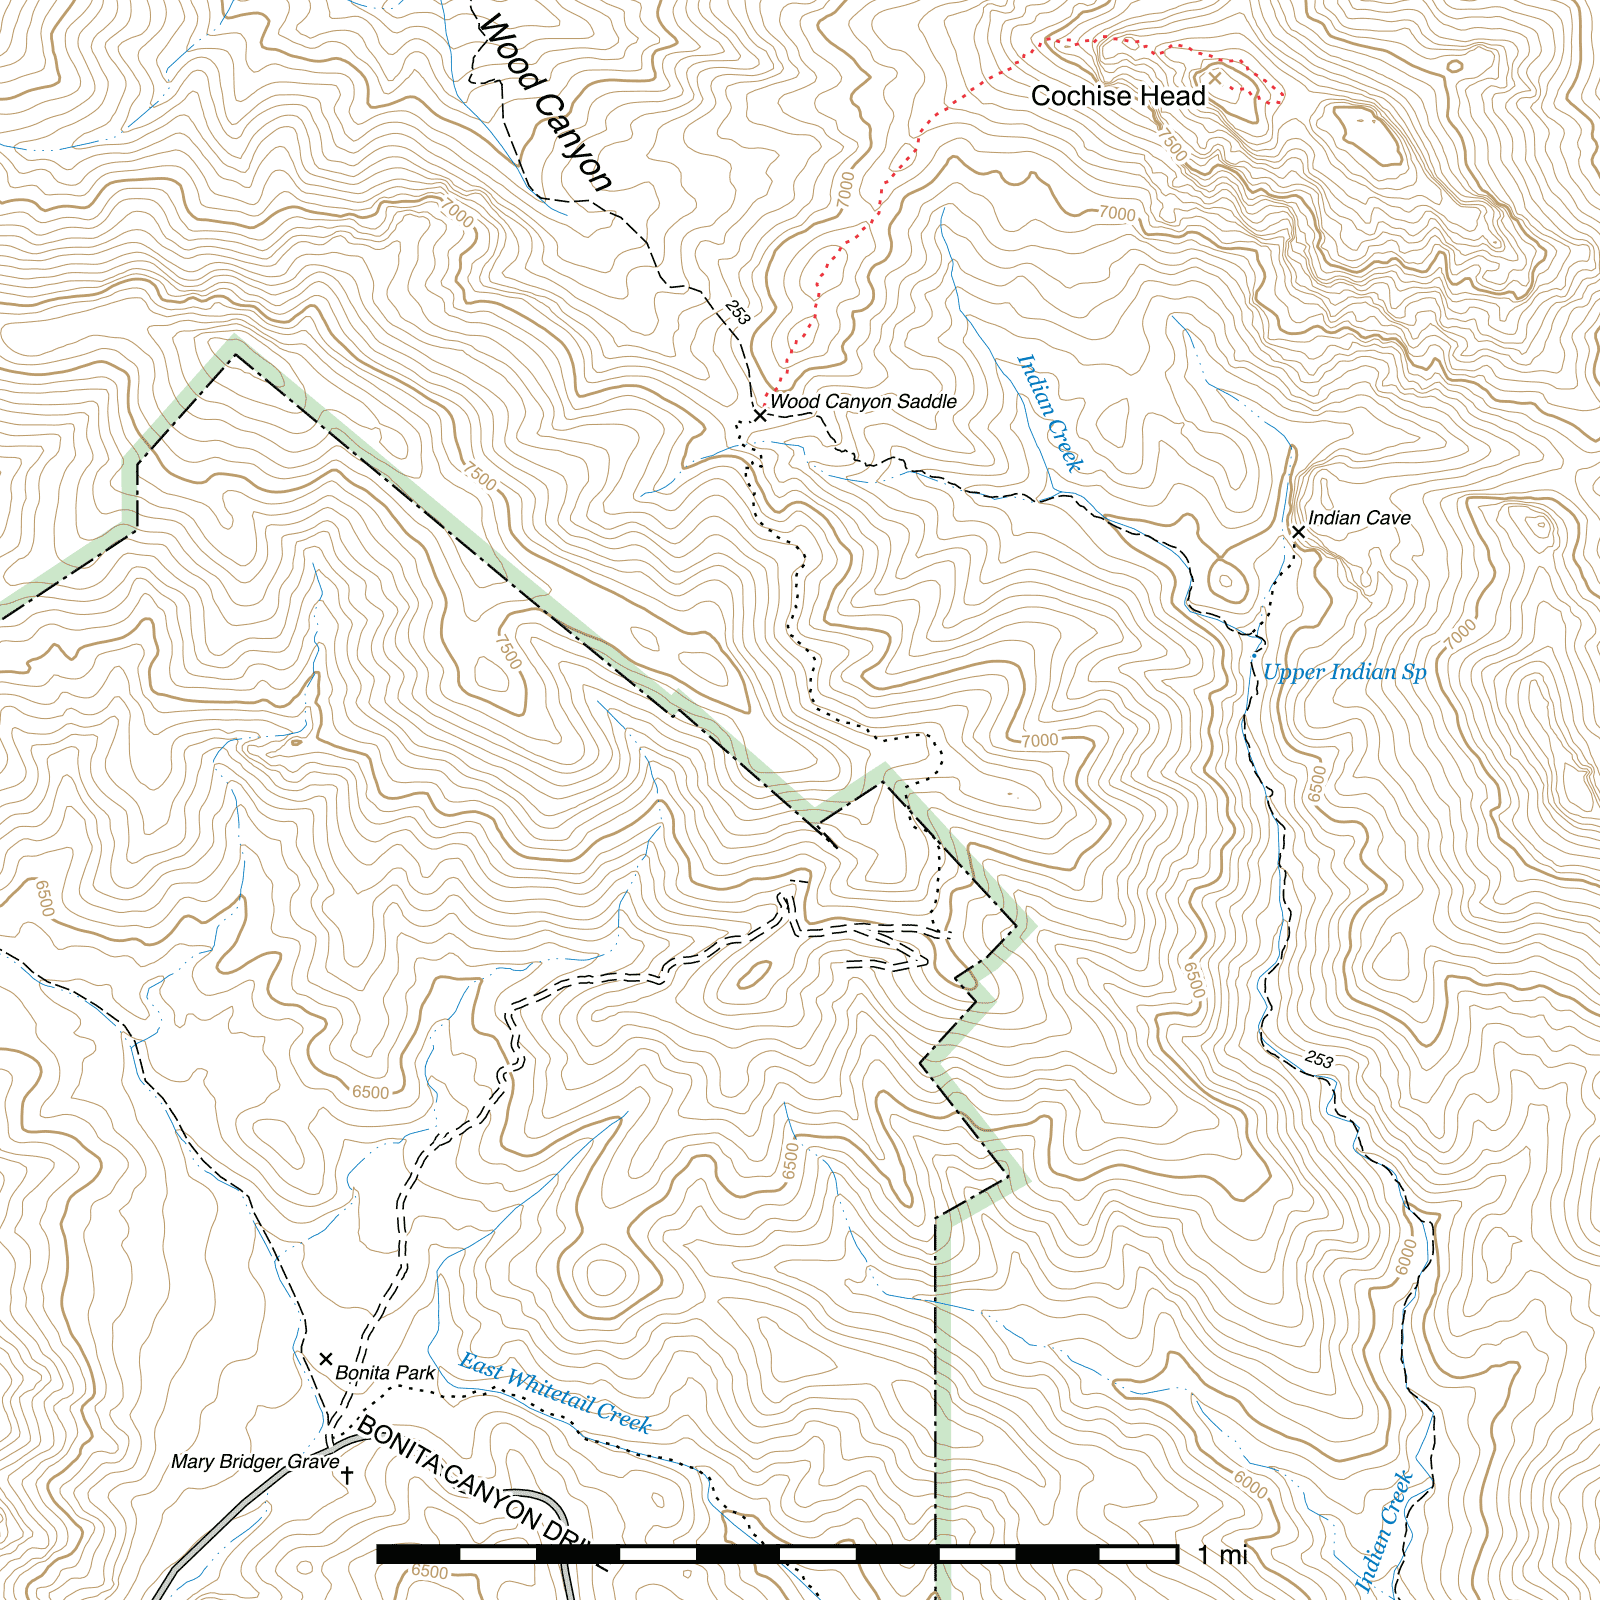 Topographic map of Cochise Head Route